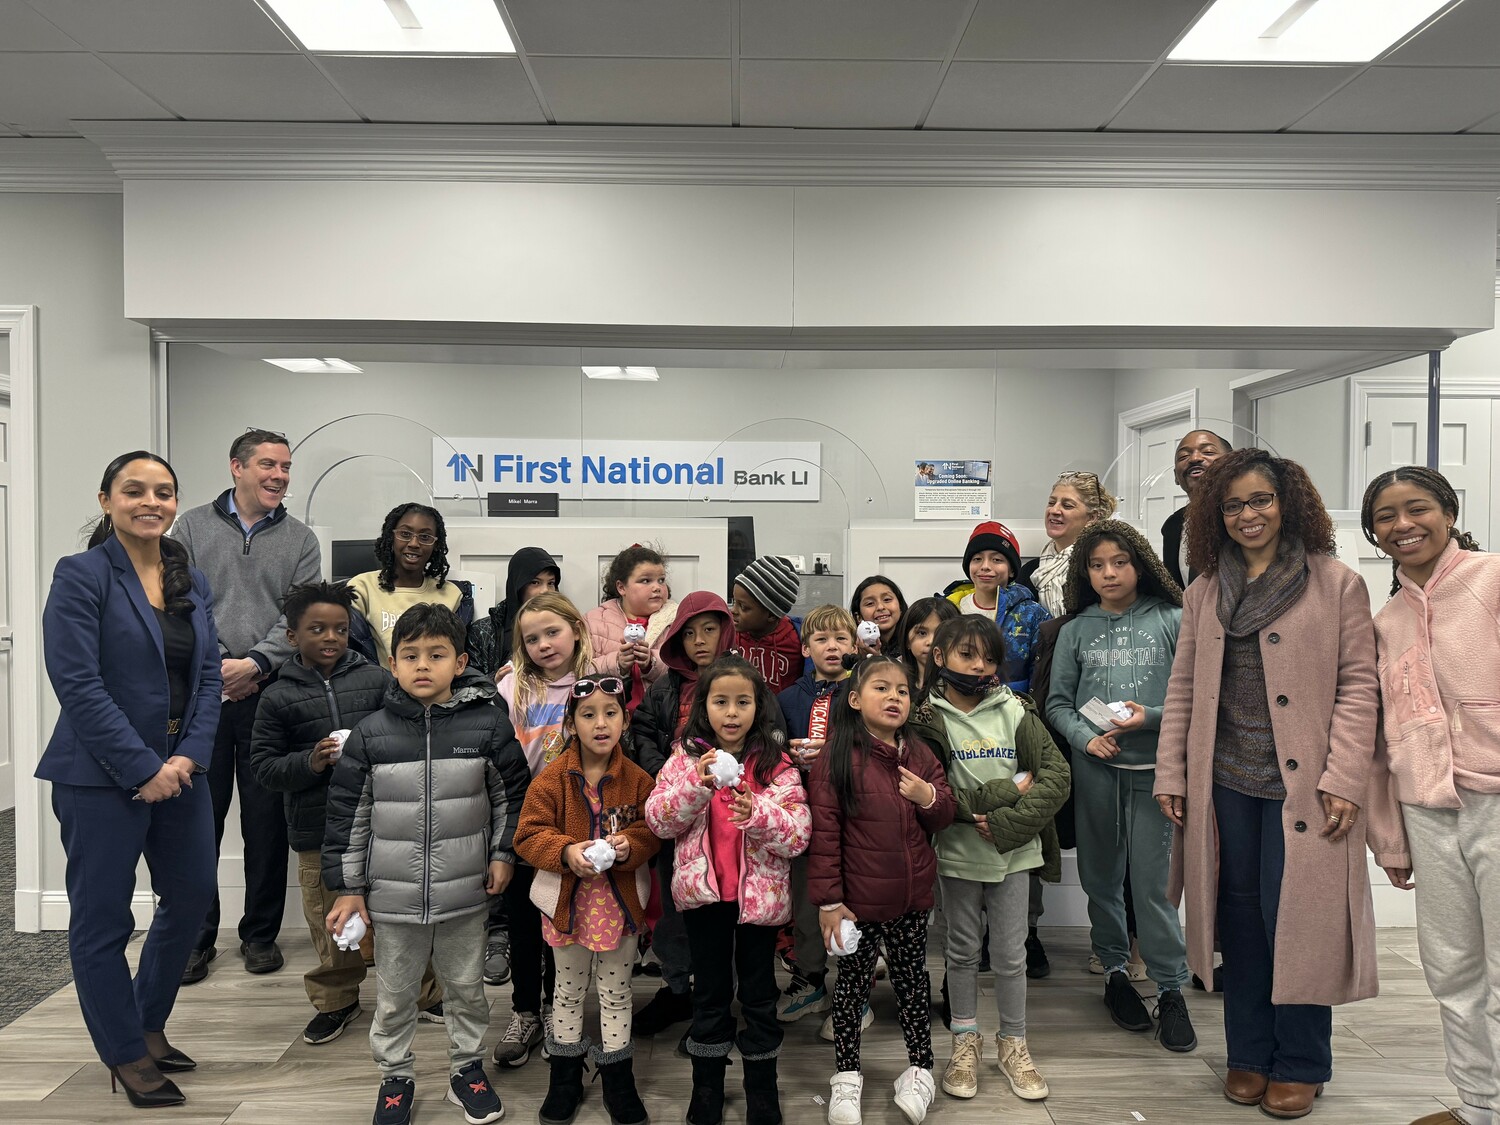 The Bridgehampton Child Care and Recreational Center is partnering with First National Bank's East Hampton branch to teach children about financial literacy. last Friday, the children opened their own savings accounts. COURTESY BRIDGEHAMPTON CHILD CARE AND RECREATIONAL CENTER